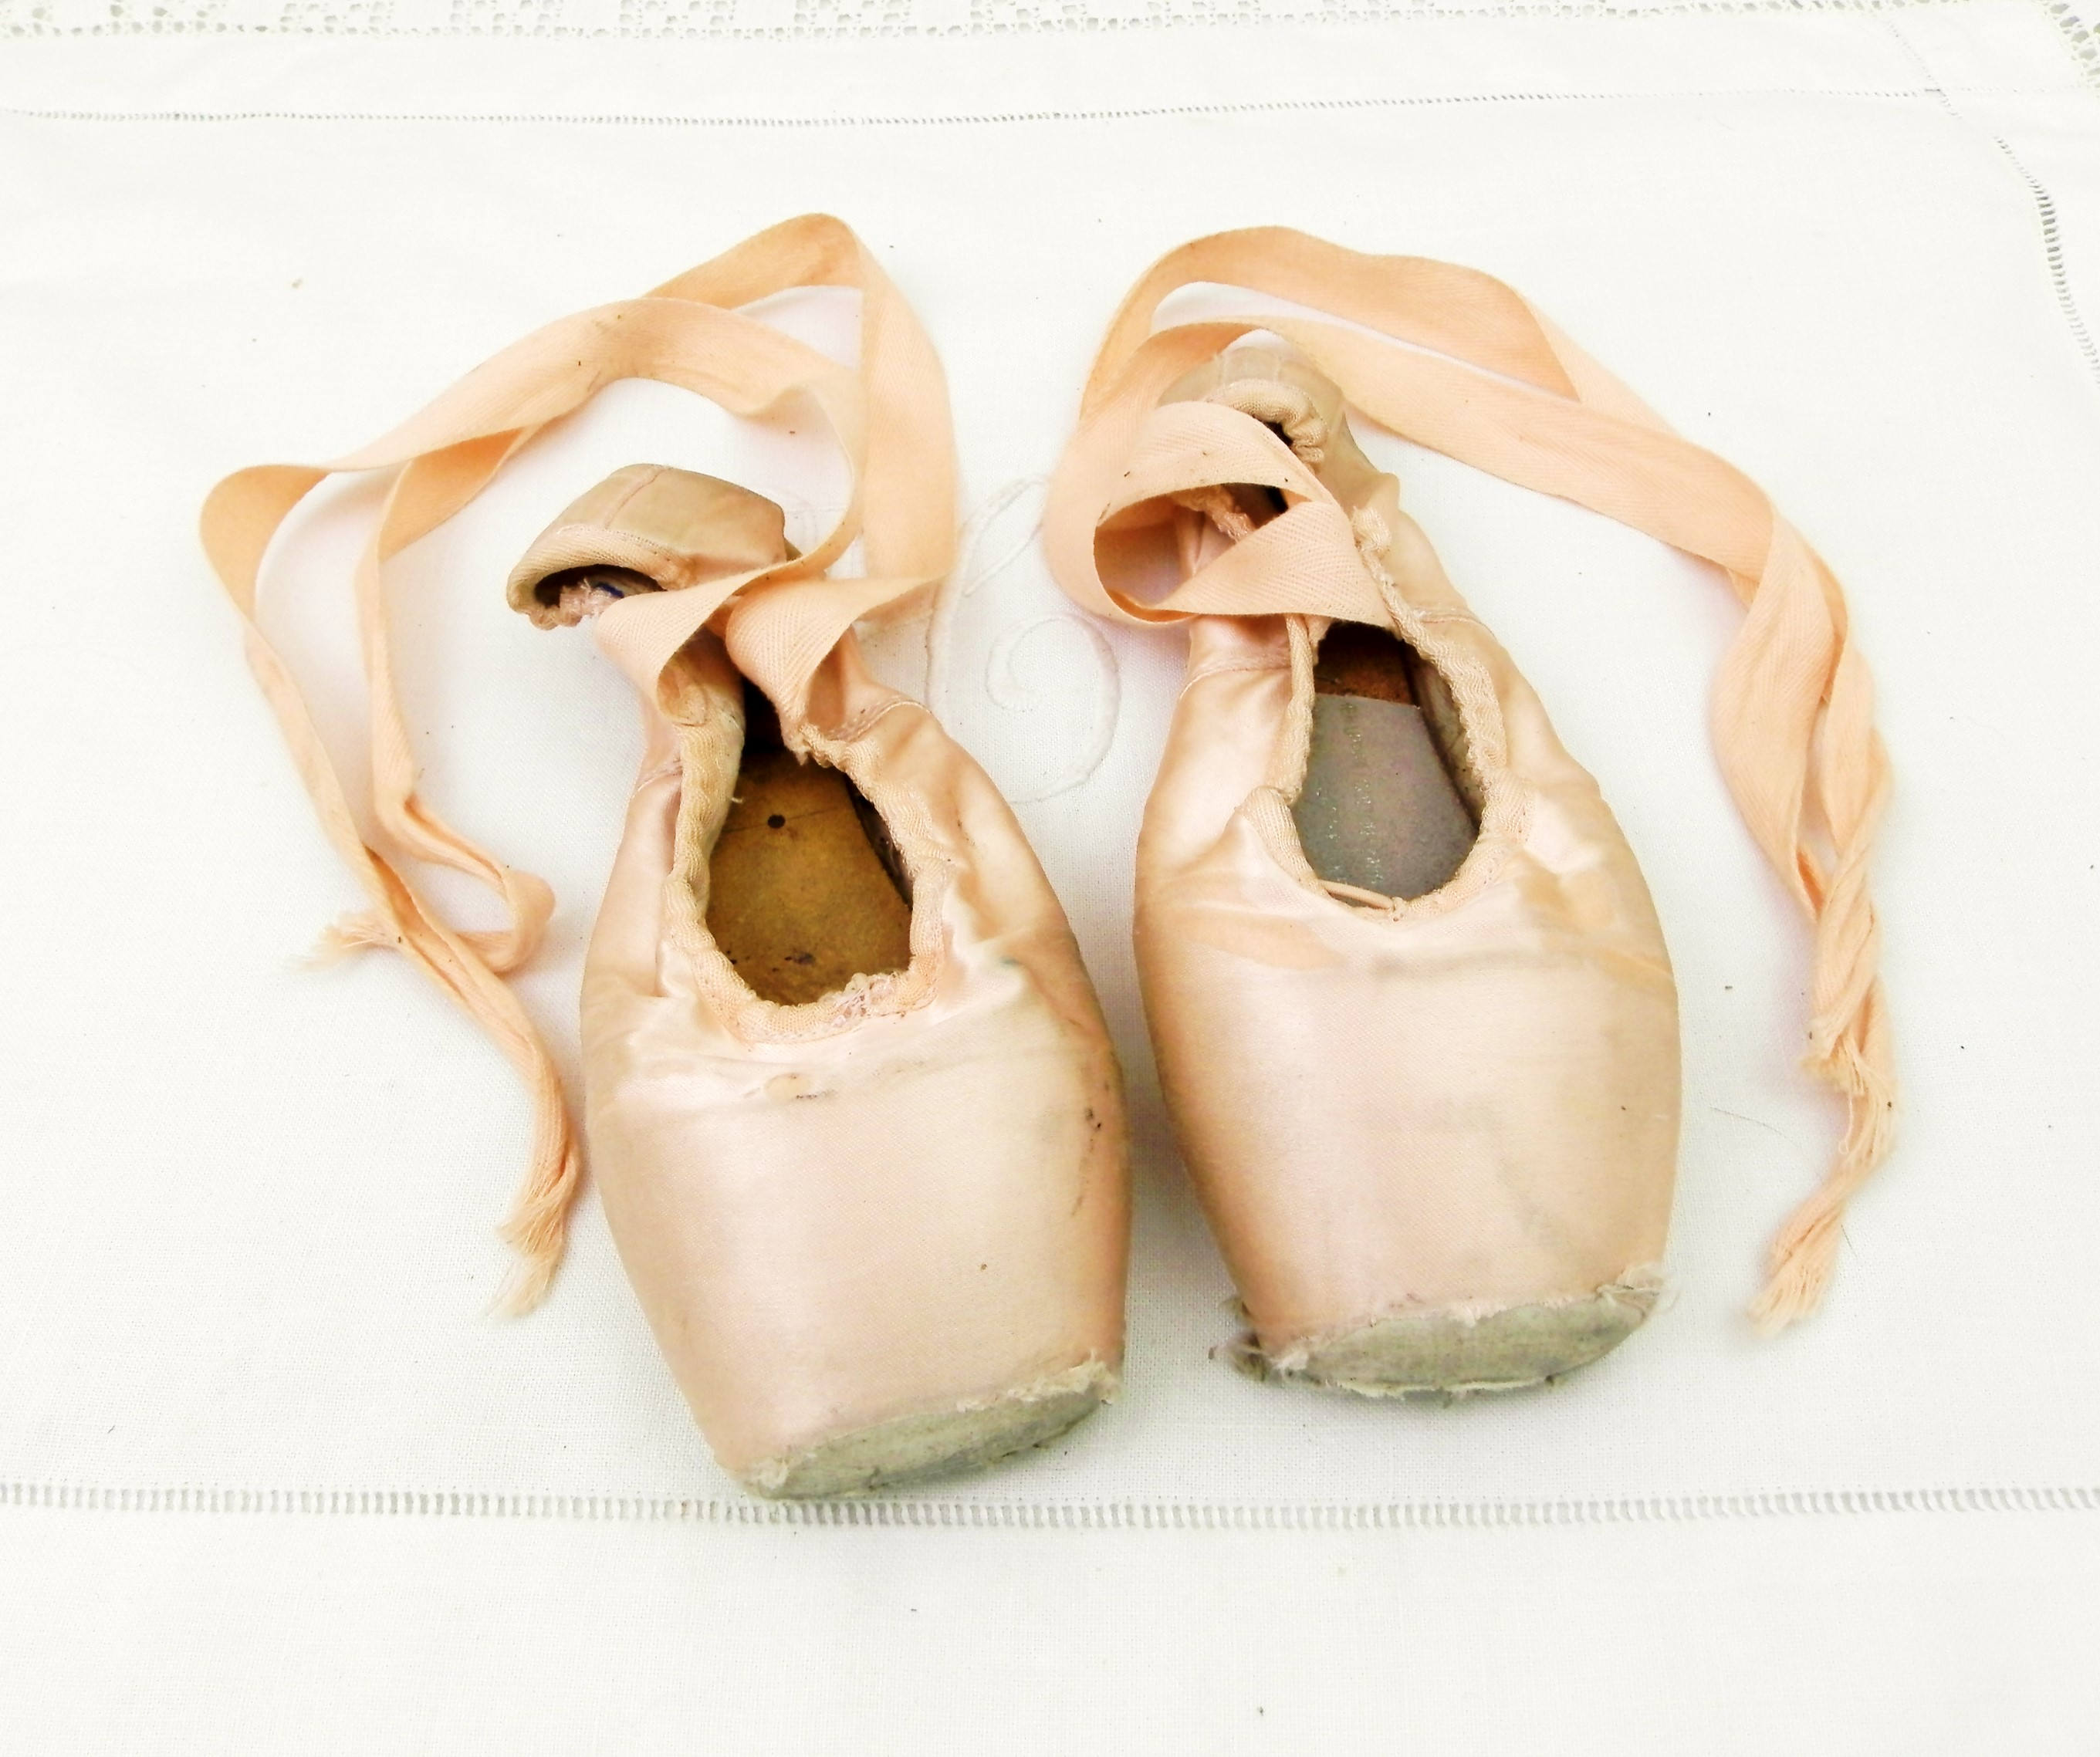 Vintage Pink Satin Girls Pointe Ballet Shoes with Ribbons, Worn Shabby Ballerina Costume Shoe by Size 4 Leather Sole